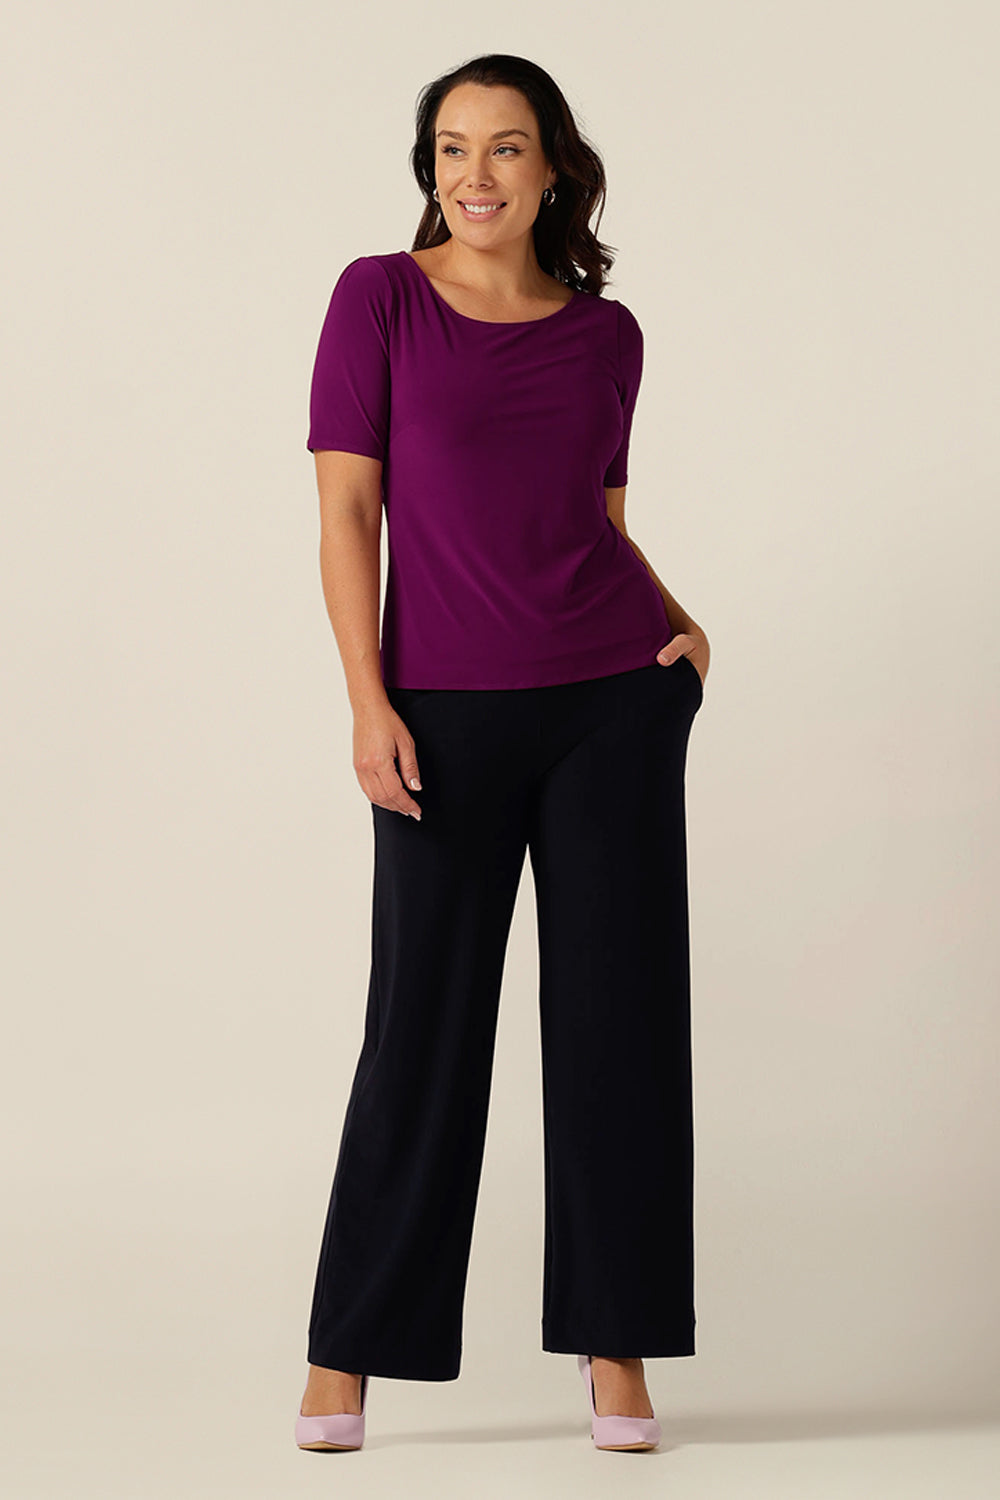 simple line, softly tailored magenta jersey top with boat neckline and short sleeves